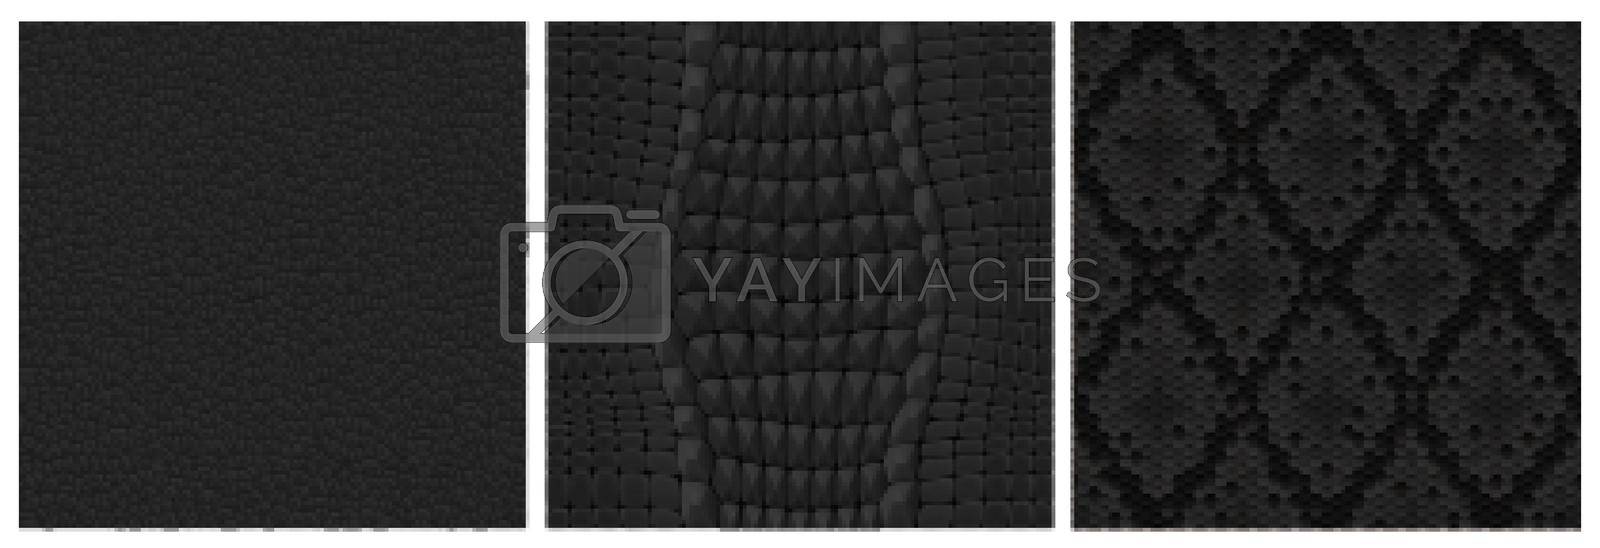 Black animal skin seamless textures for game, textile or wallpaper. Realistic 3d vector repeated patterns of snake, crocodile and and leather. Fabric backgrounds of natural or artificial reptile skins